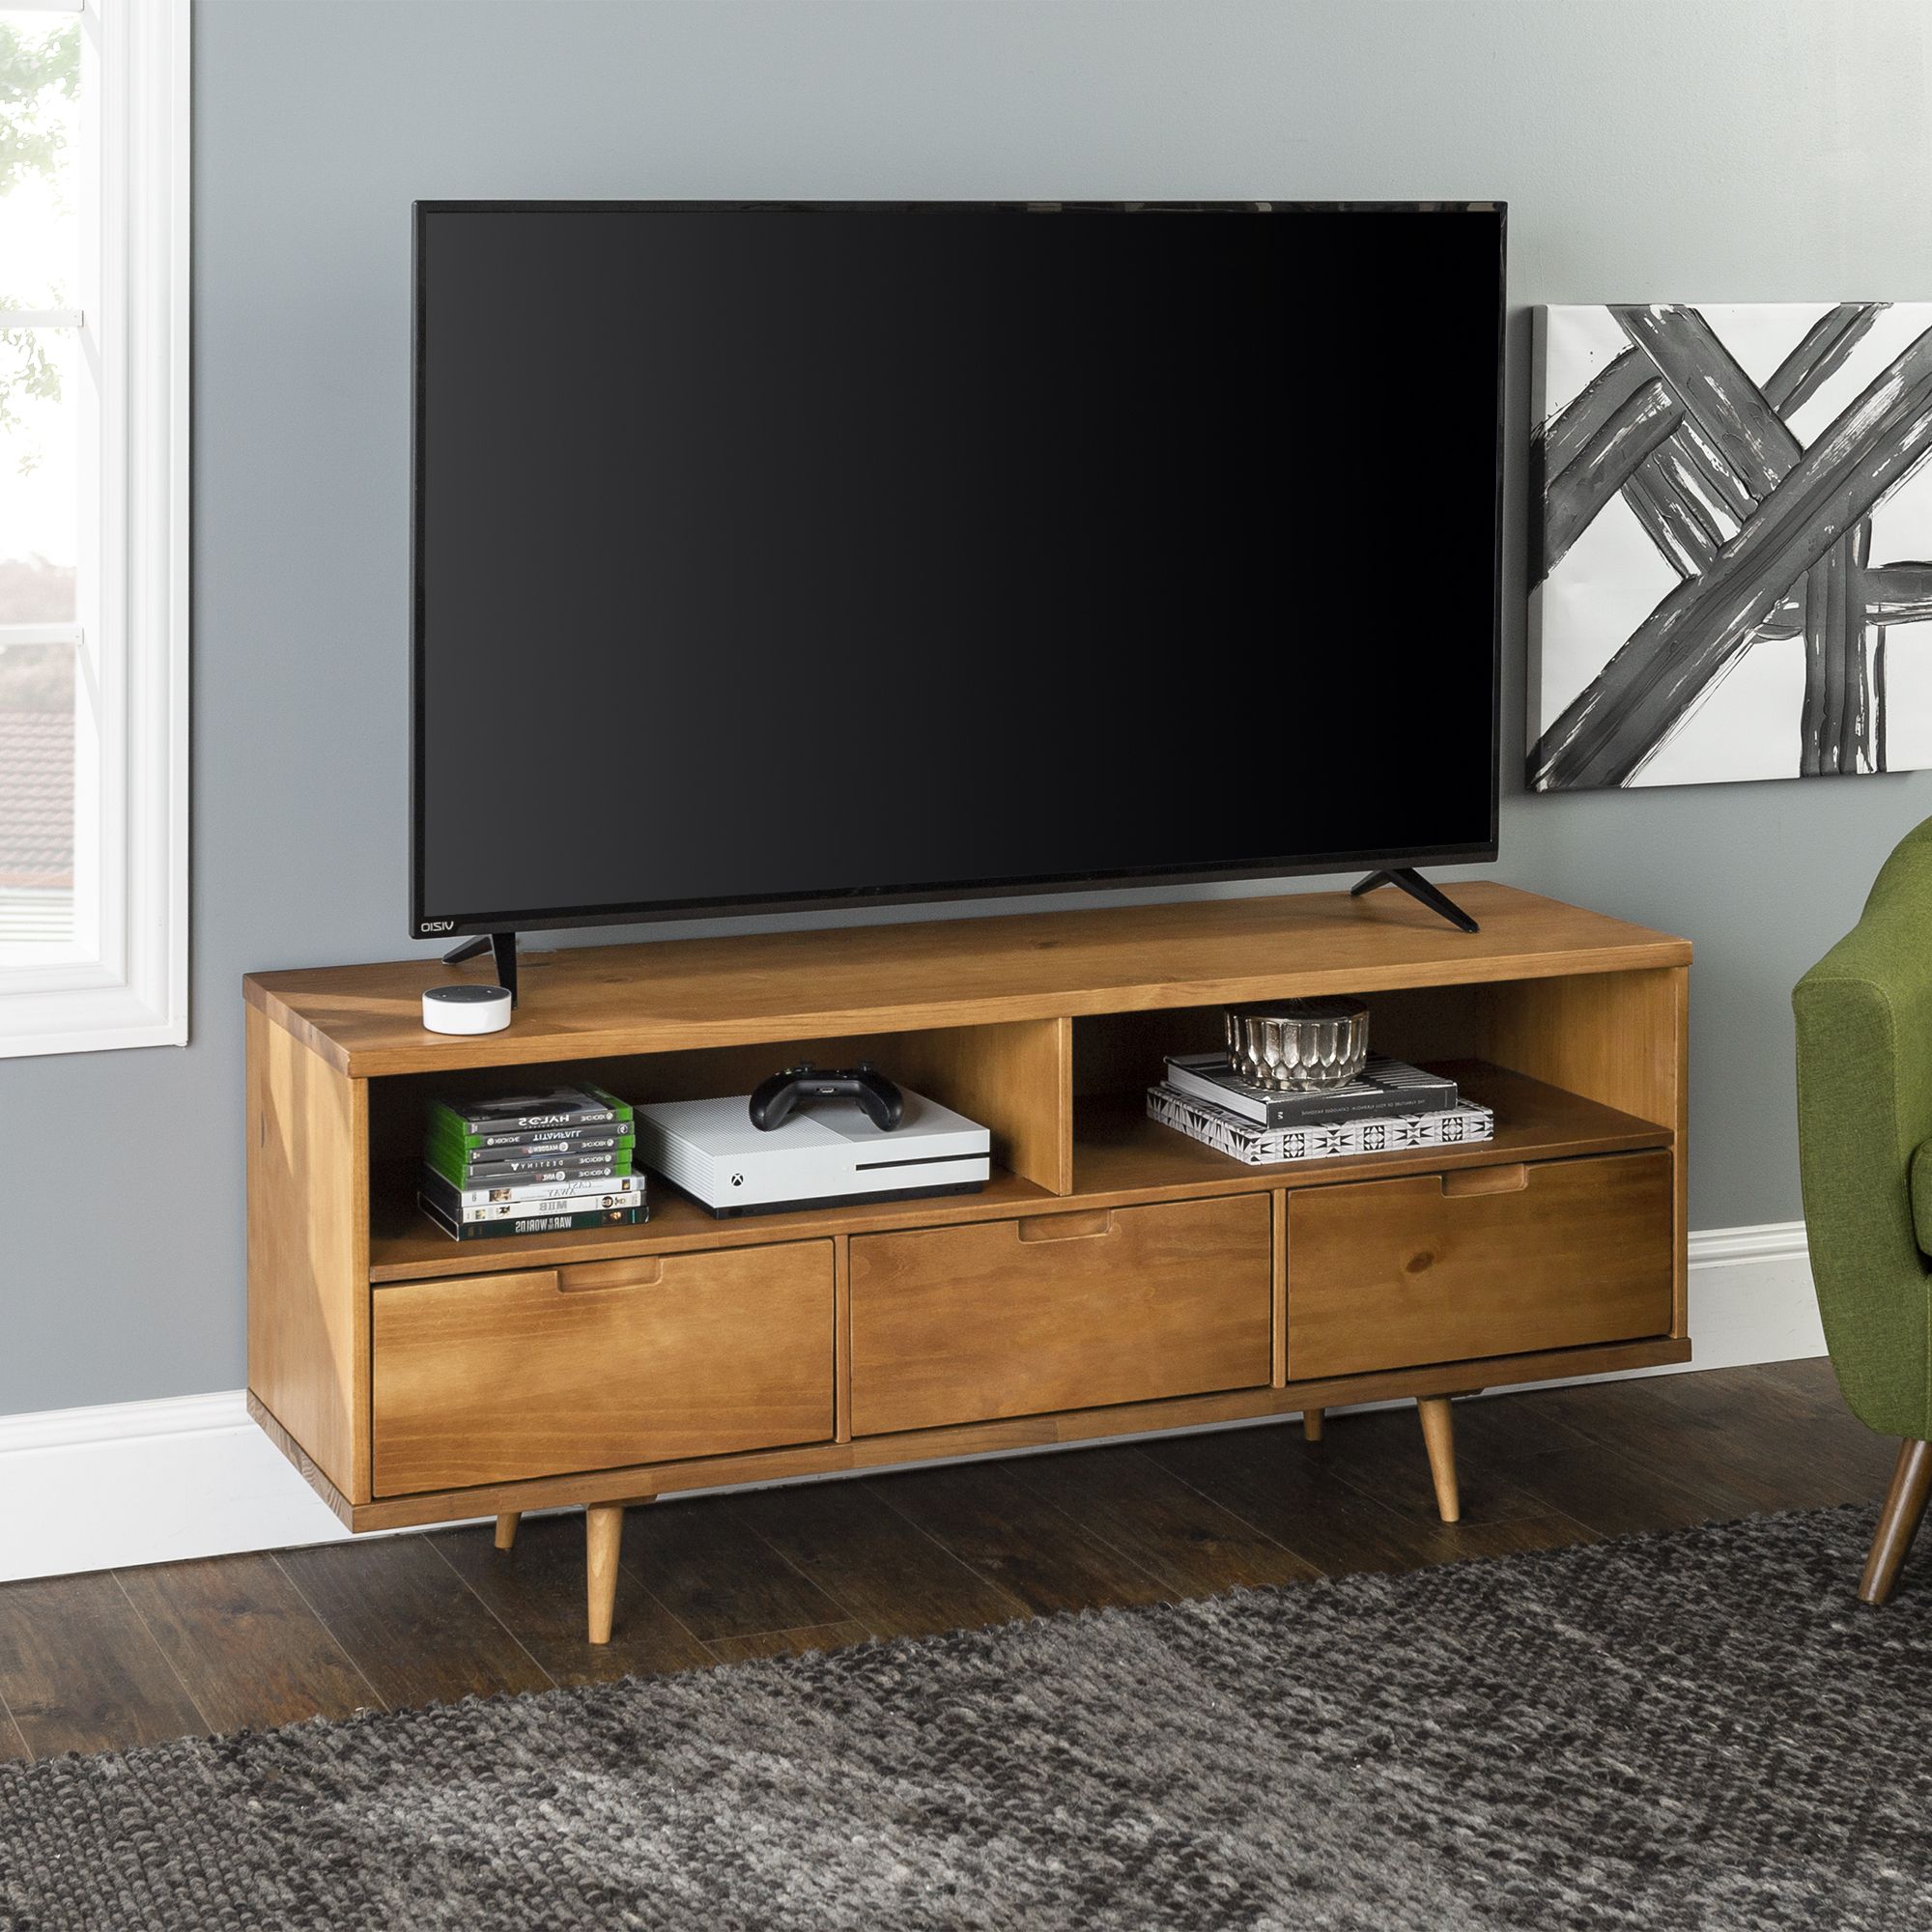 Desert Fields Tv Stand For Tvs Up To 65", Caramel – Walmart Pertaining To Preferred Caramelized Tv Stands (View 3 of 10)